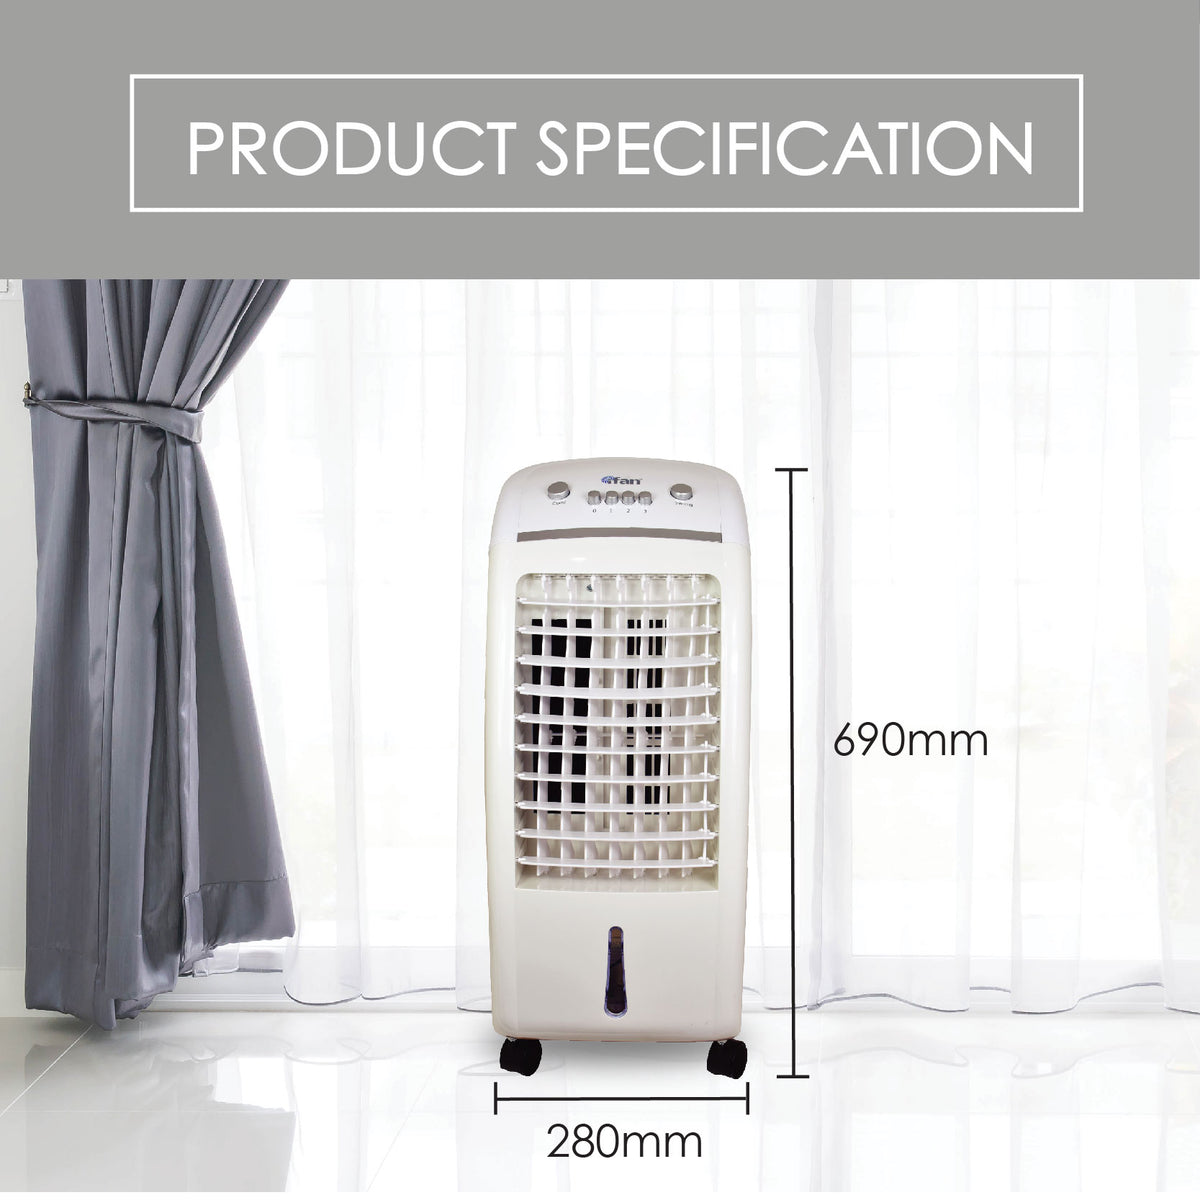 iFan Air Cooler Evaporative with Built-in Ionizer (IF7310) - PowerPacSG